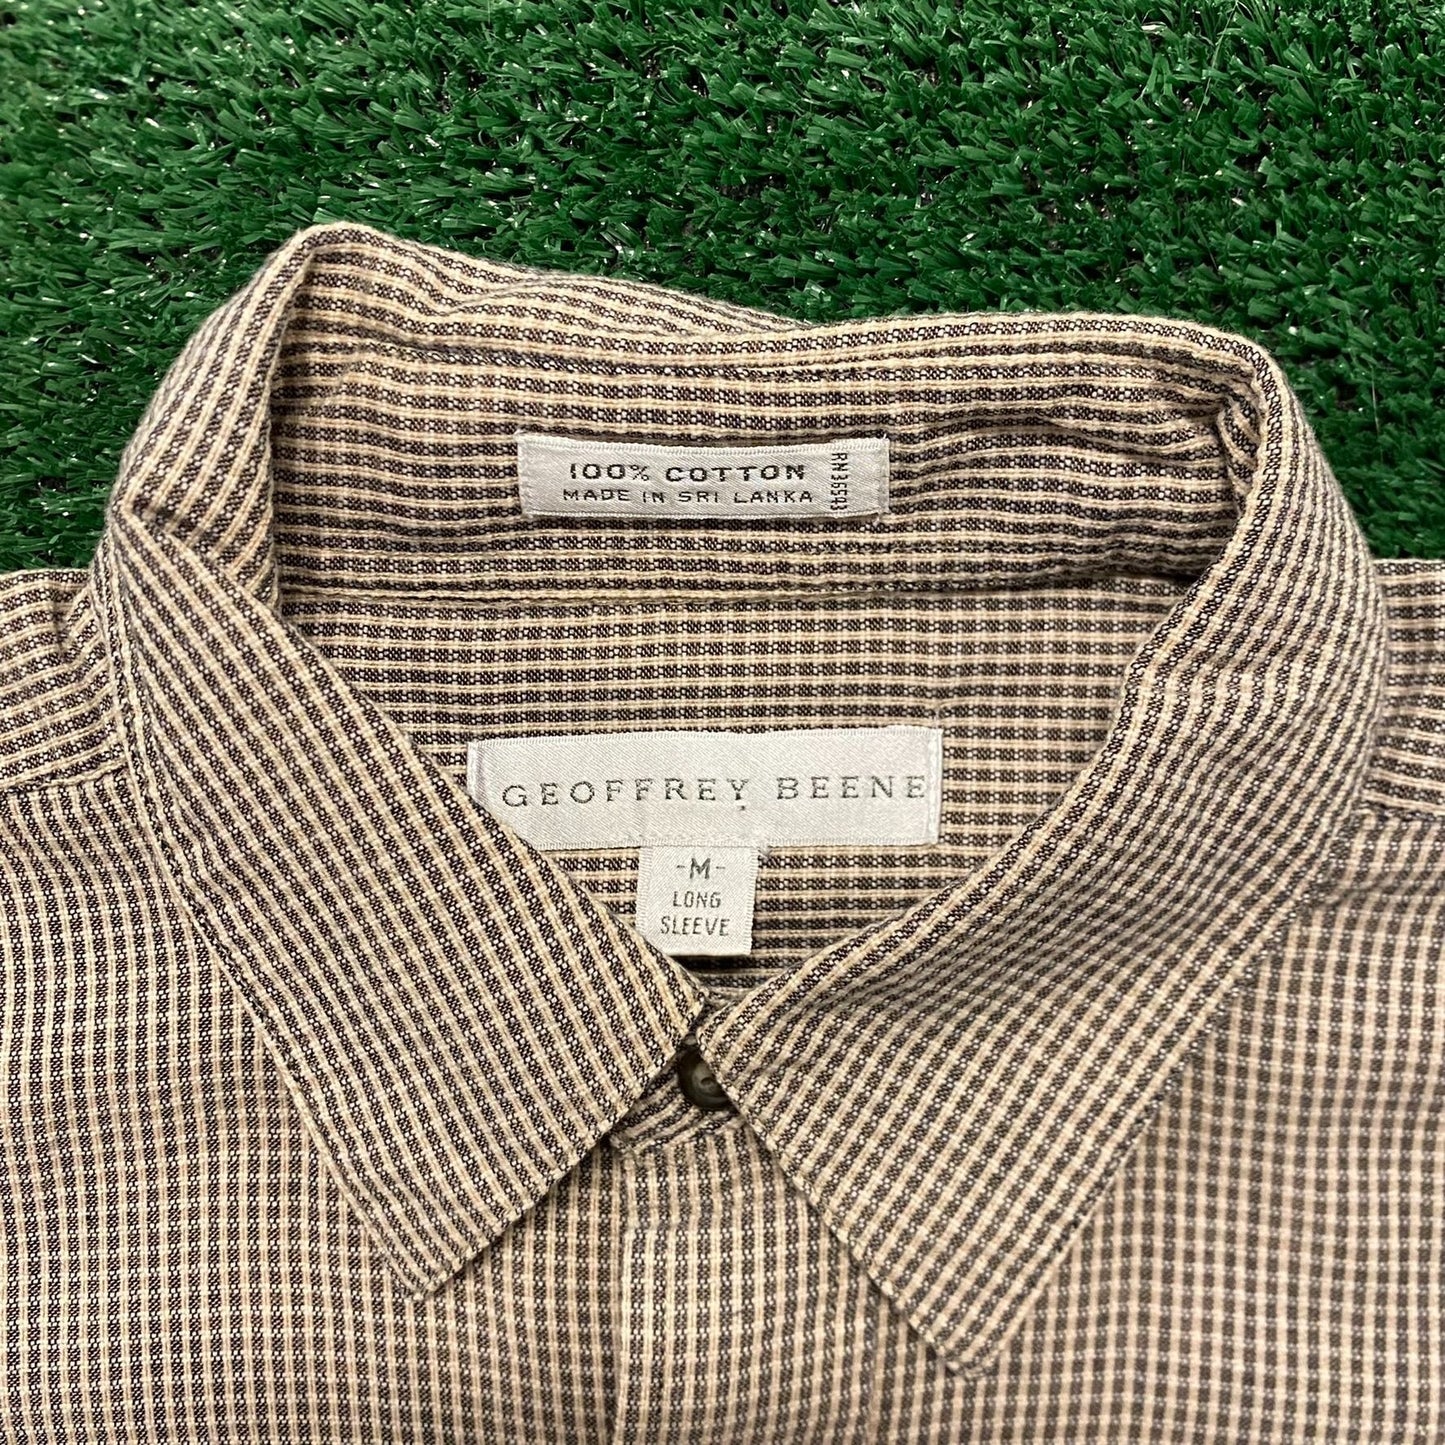 Micro Plaid Check Vintage Casual Button Up Shirt